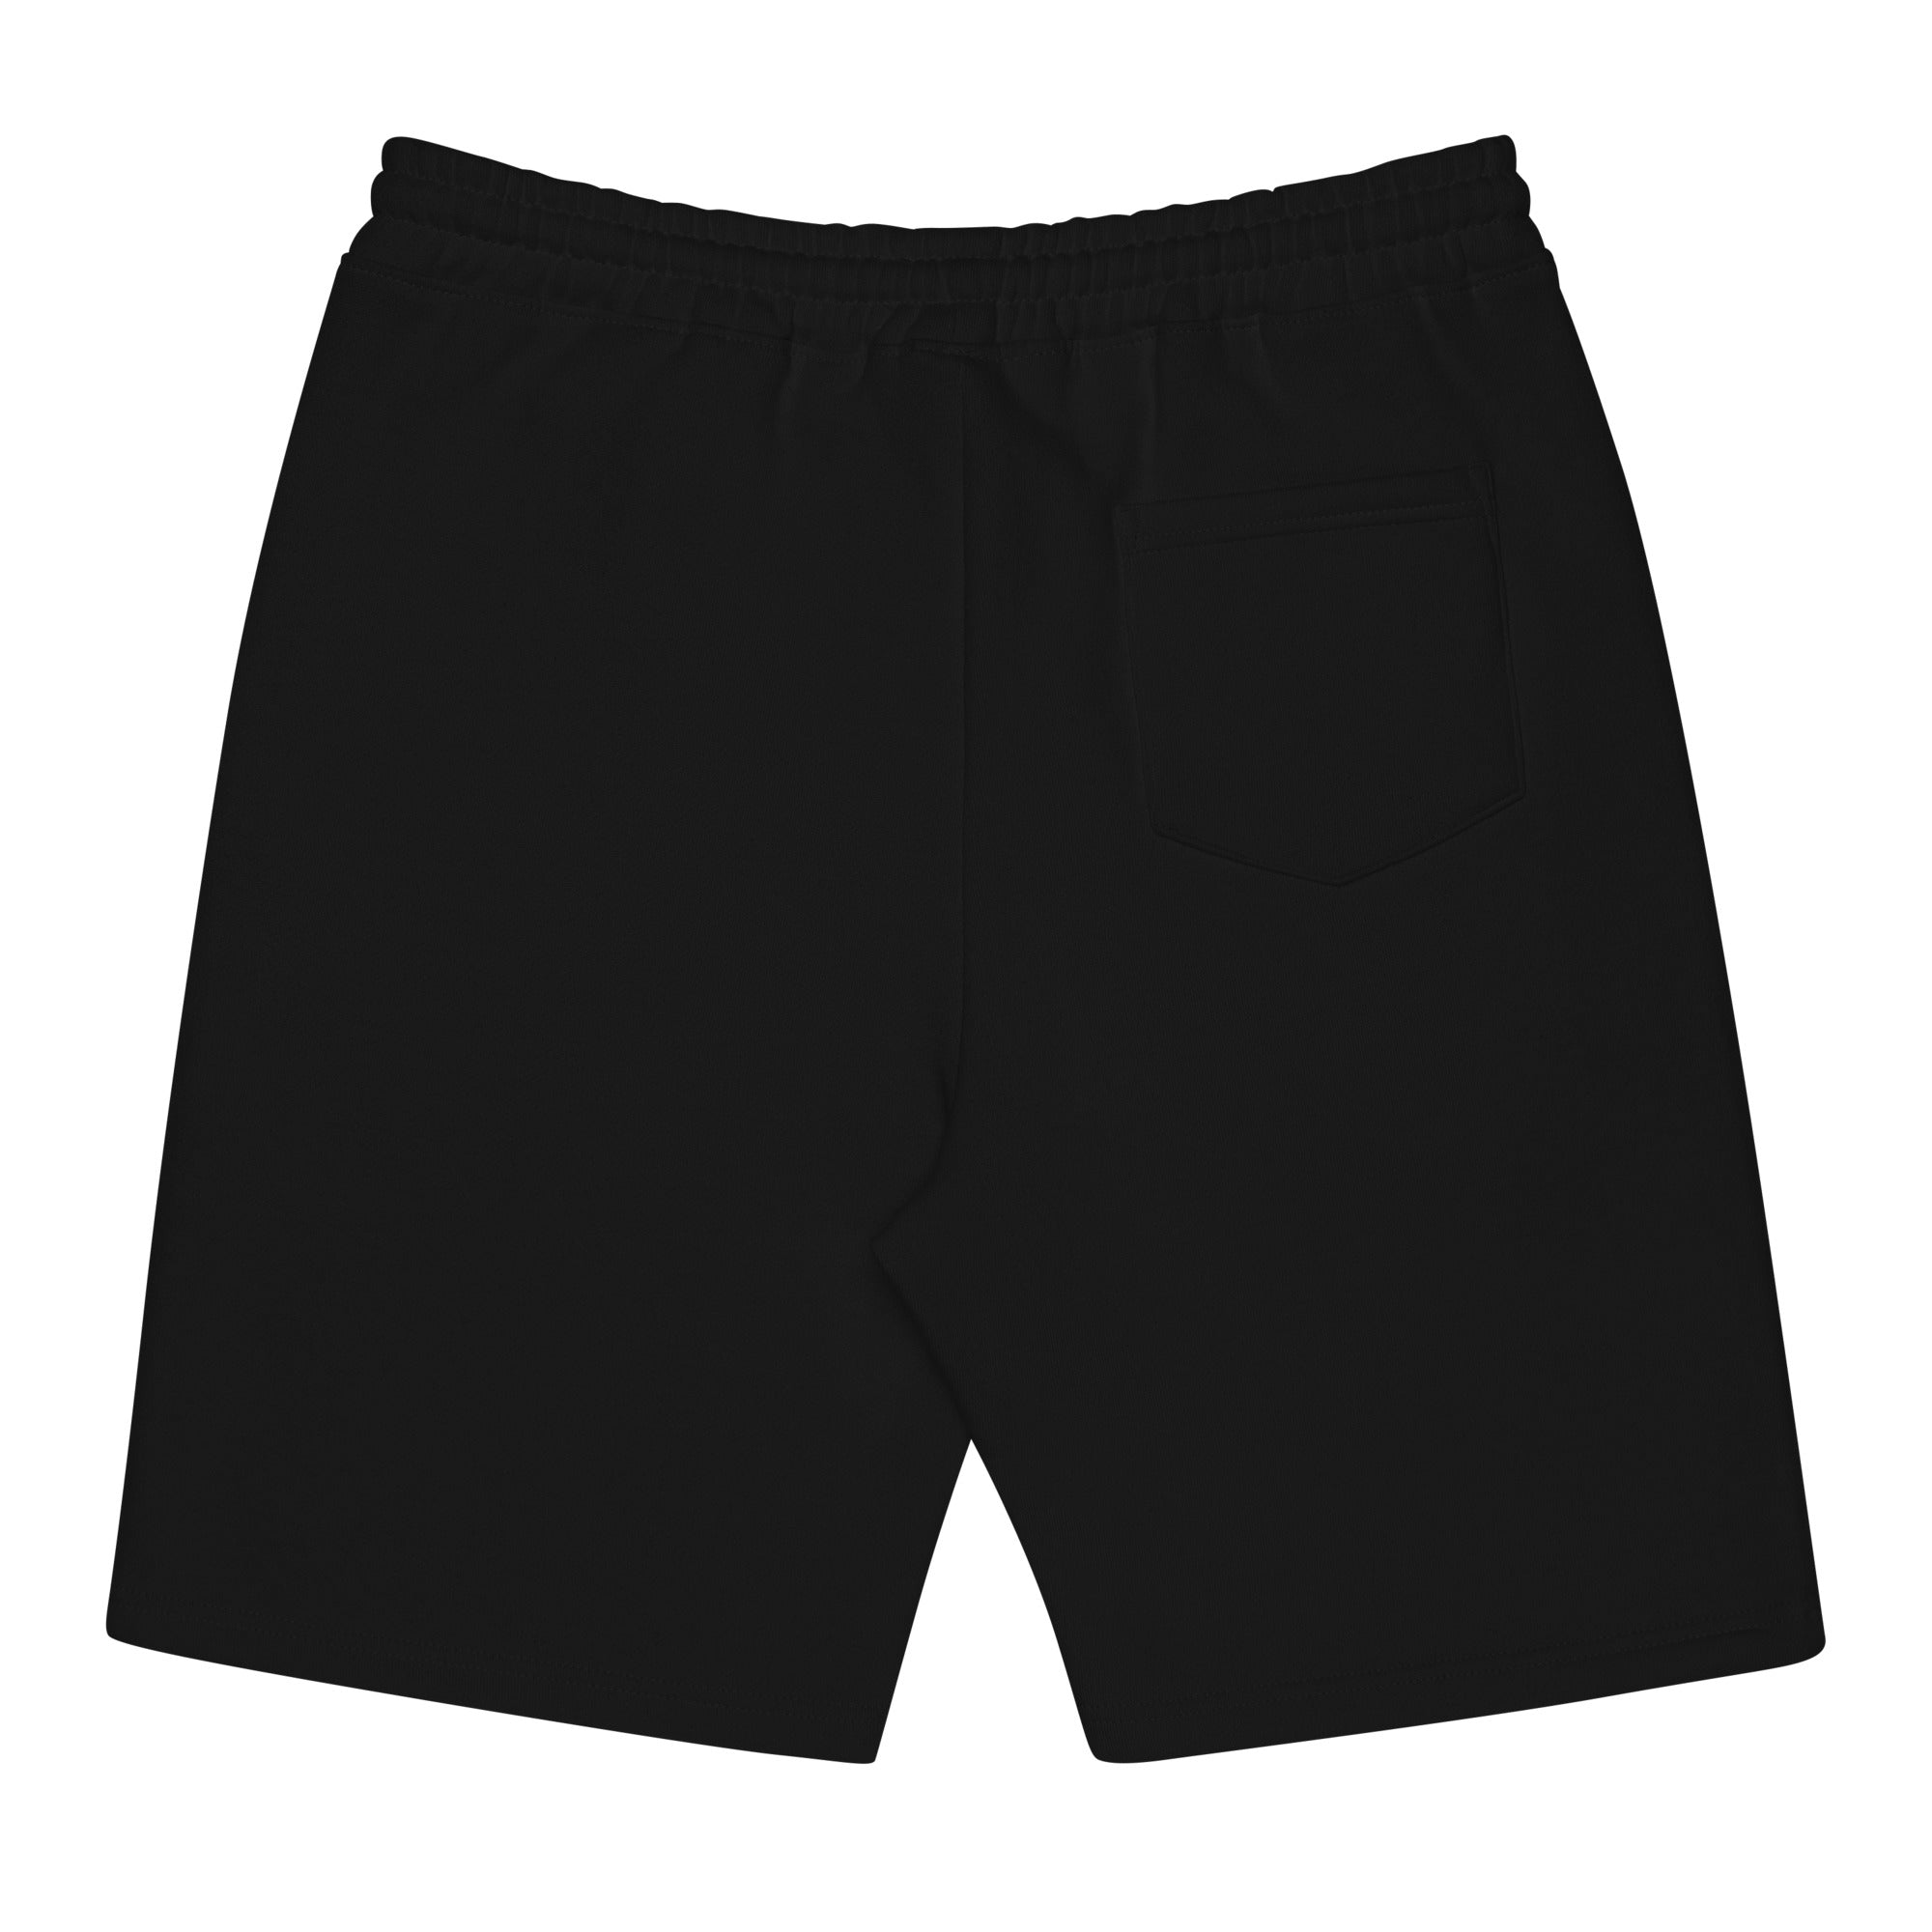 LIMITED "Willy Outside" Men's fleece shorts